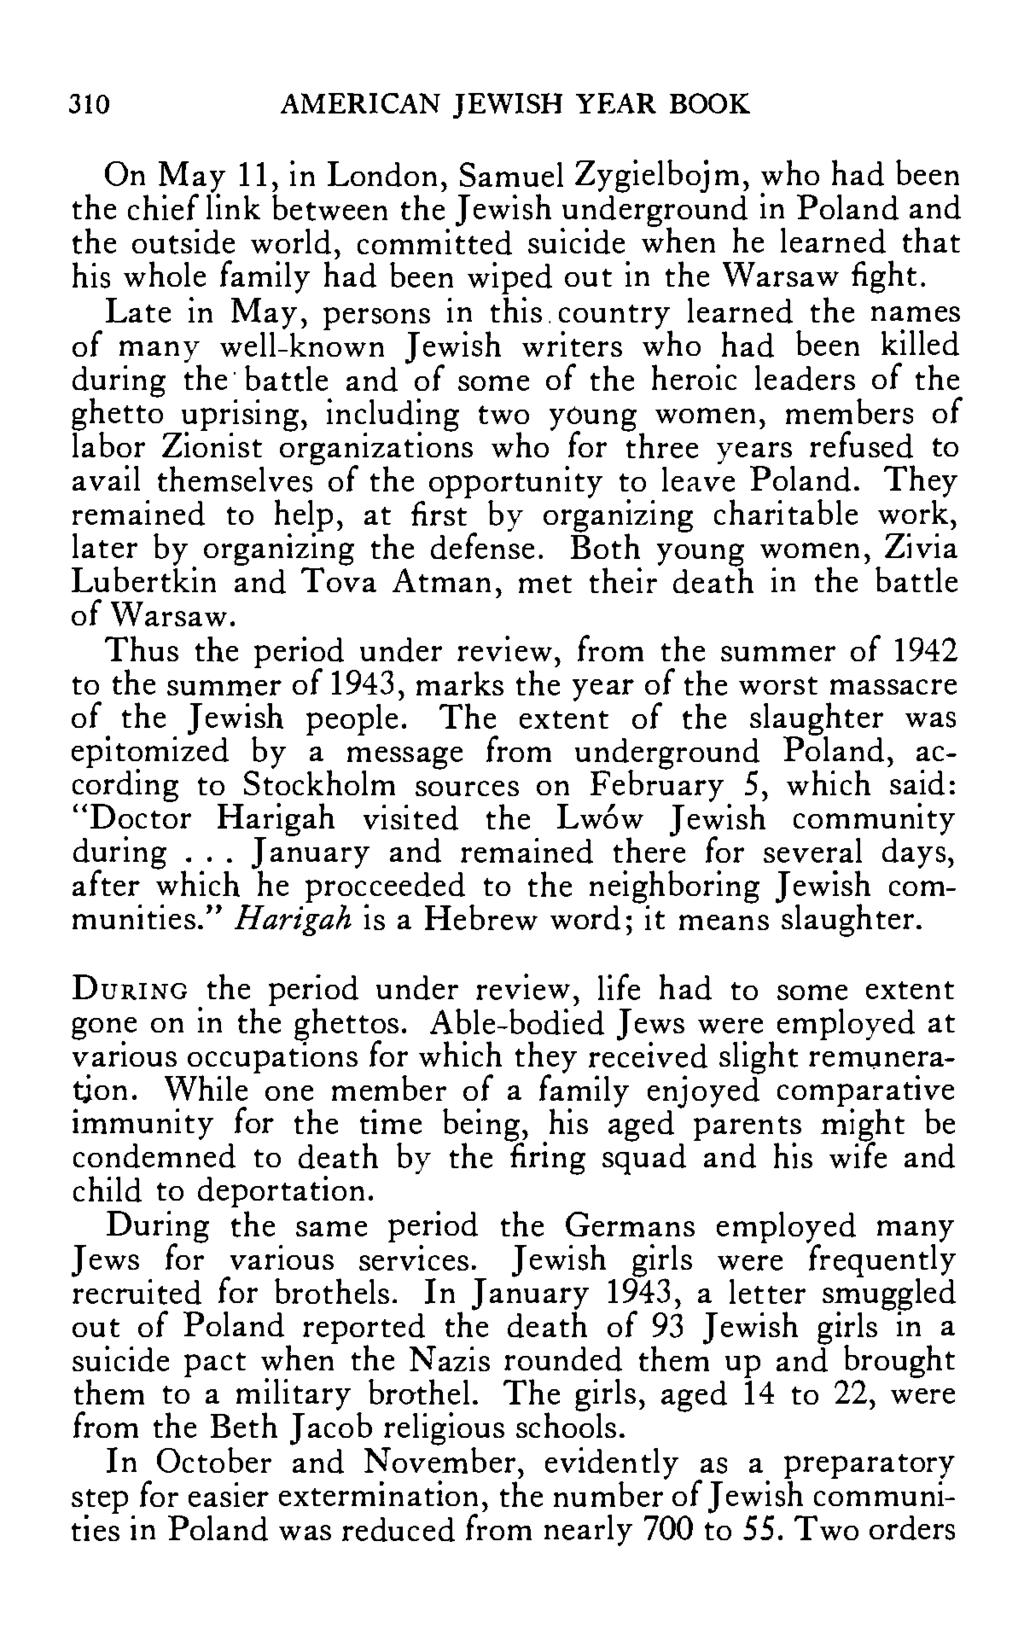 310 AMERICAN JEWISH YEAR BOOK On May 11, in London, Samuel Zygielbojm, who had been the chief link between the Jewish underground in Poland and the outside world, committed suicide when he learned